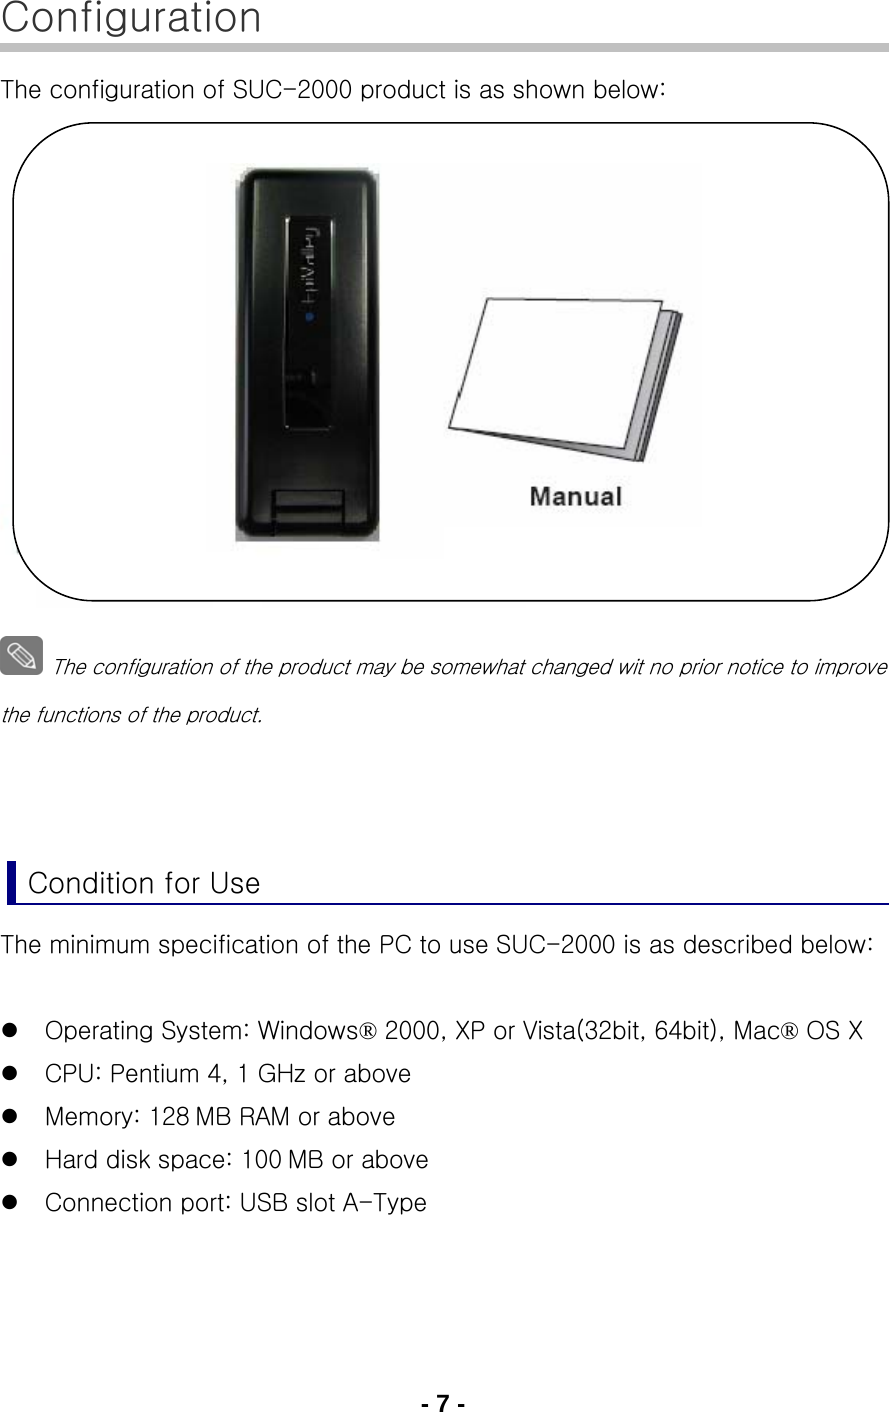 - 7 - Configuration The configuration of SUC-2000 product is as shown below:                  The configuration of the product may be somewhat changed wit no prior notice to improve the functions of the product.    Condition for Use The minimum specification of the PC to use SUC-2000 is as described below:  z Operating System: Windows® 2000, XP or Vista(32bit, 64bit), Mac® OS X z CPU: Pentium 4, 1 GHz or above z Memory: 128 MB RAM or above z Hard disk space: 100 MB or above z Connection port: USB slot A-Type   